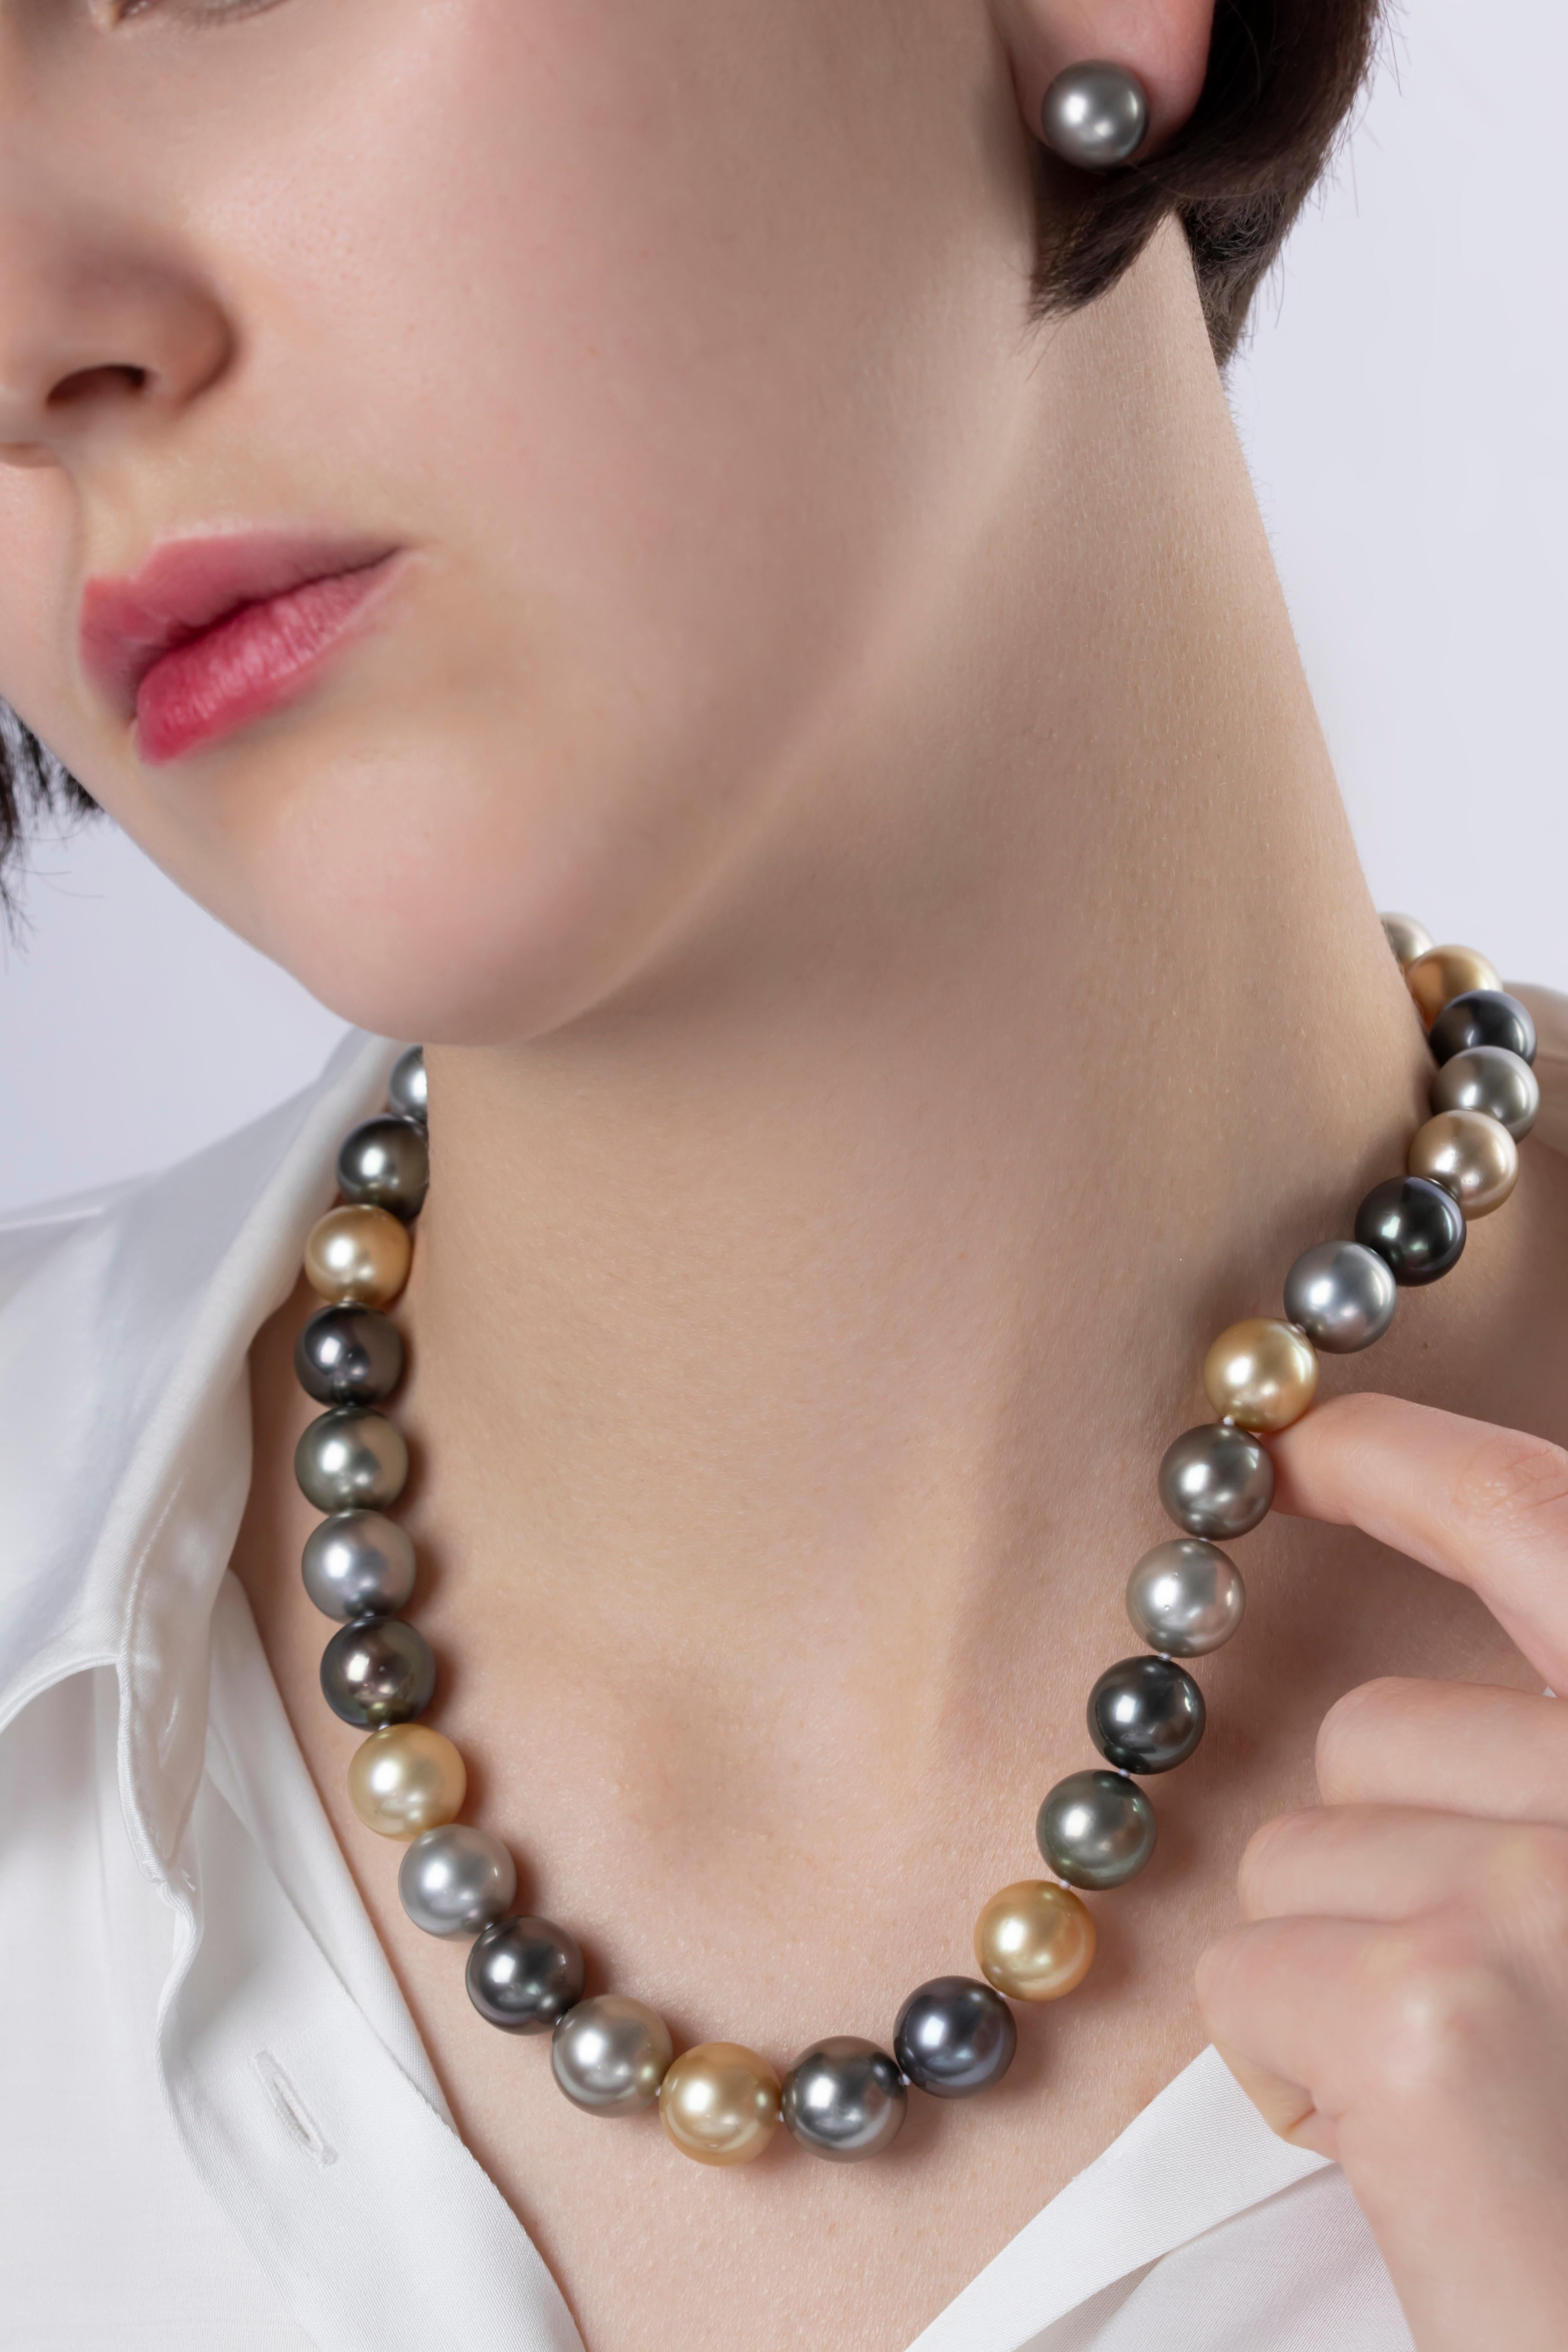 Comprised of timeless, jewellery box staples, our Classic collection is designed to last through the generations. Featuring a striking combination of various shades of Tahitian and Golden South Sea pearls set in 18ct gold, this necklace is both